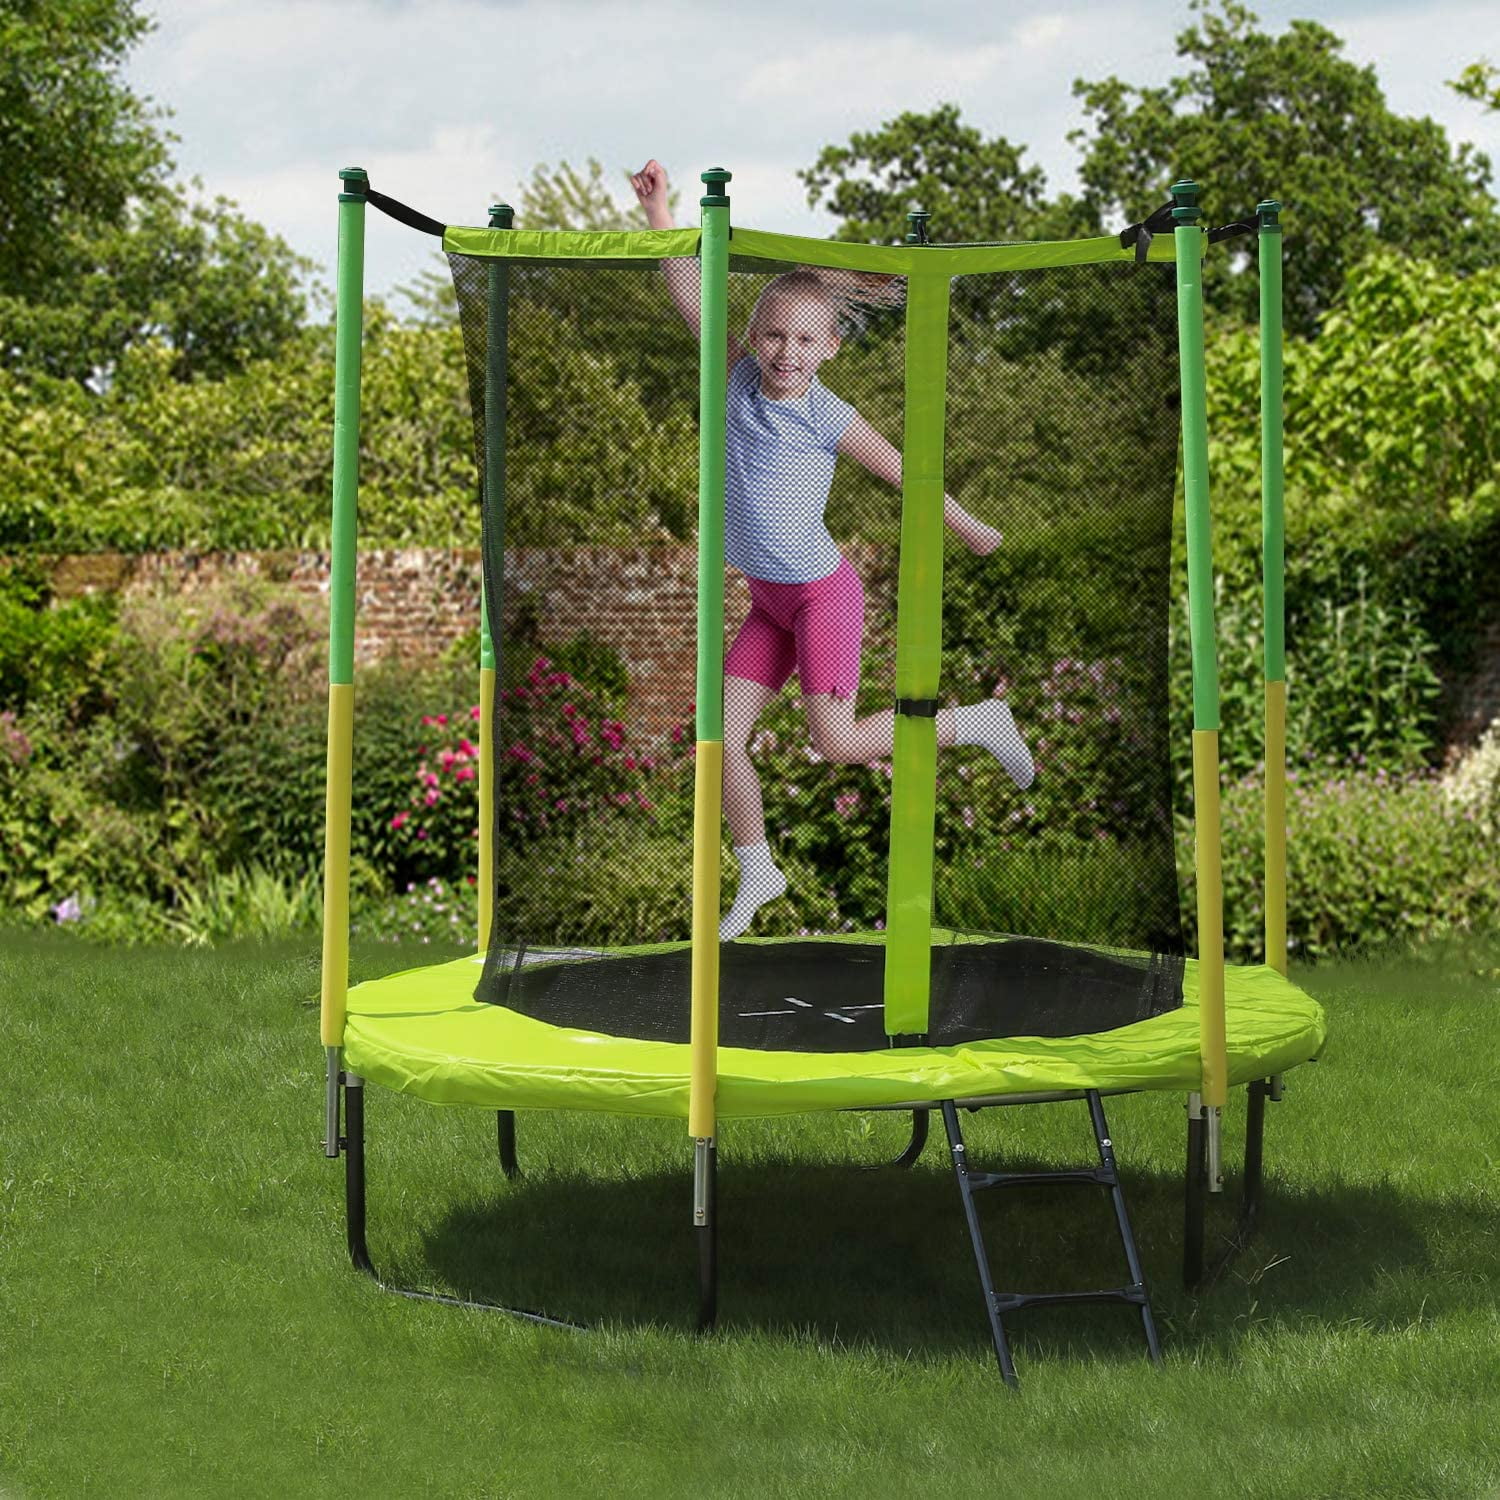 Details about   72'' 6FT Trampoline w/Safe Enclosure Net Jumping Mat And Spring Cover Padding 